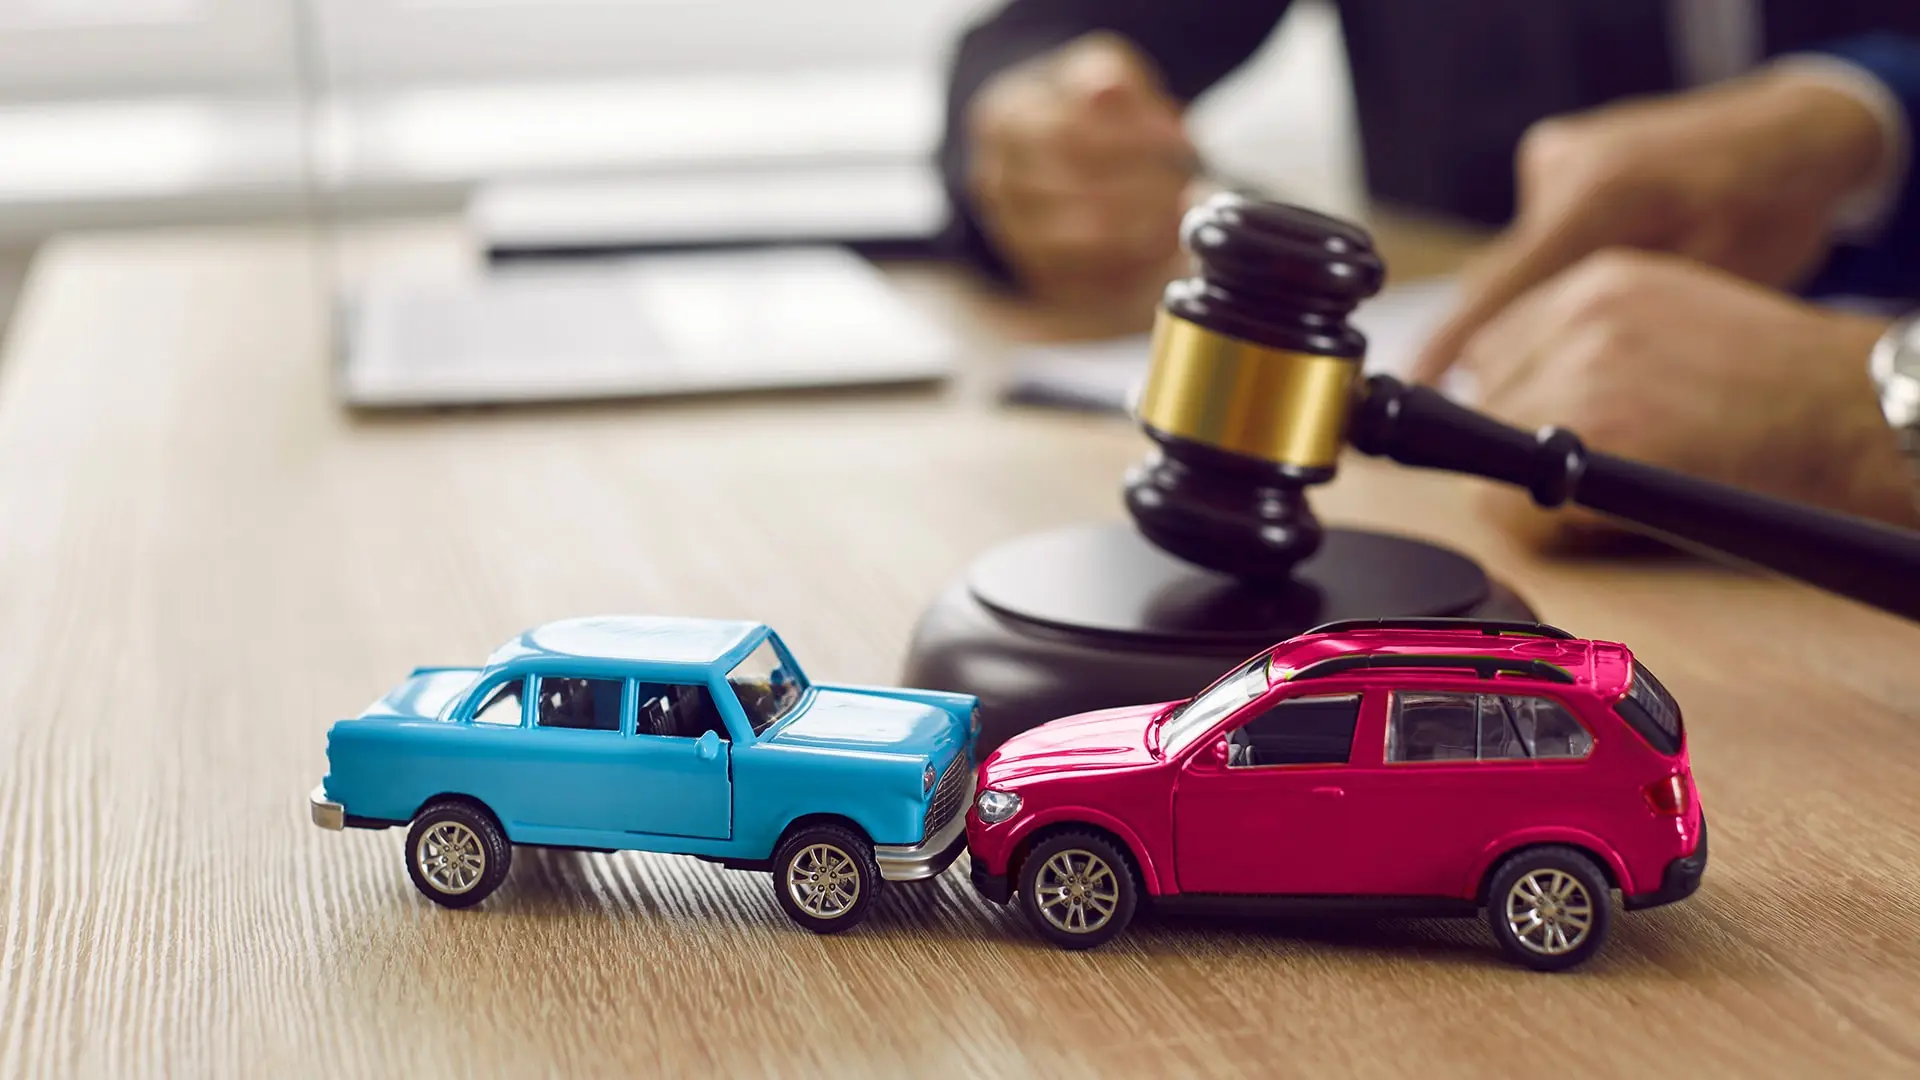 toy cars in pretend accident with judge gavel